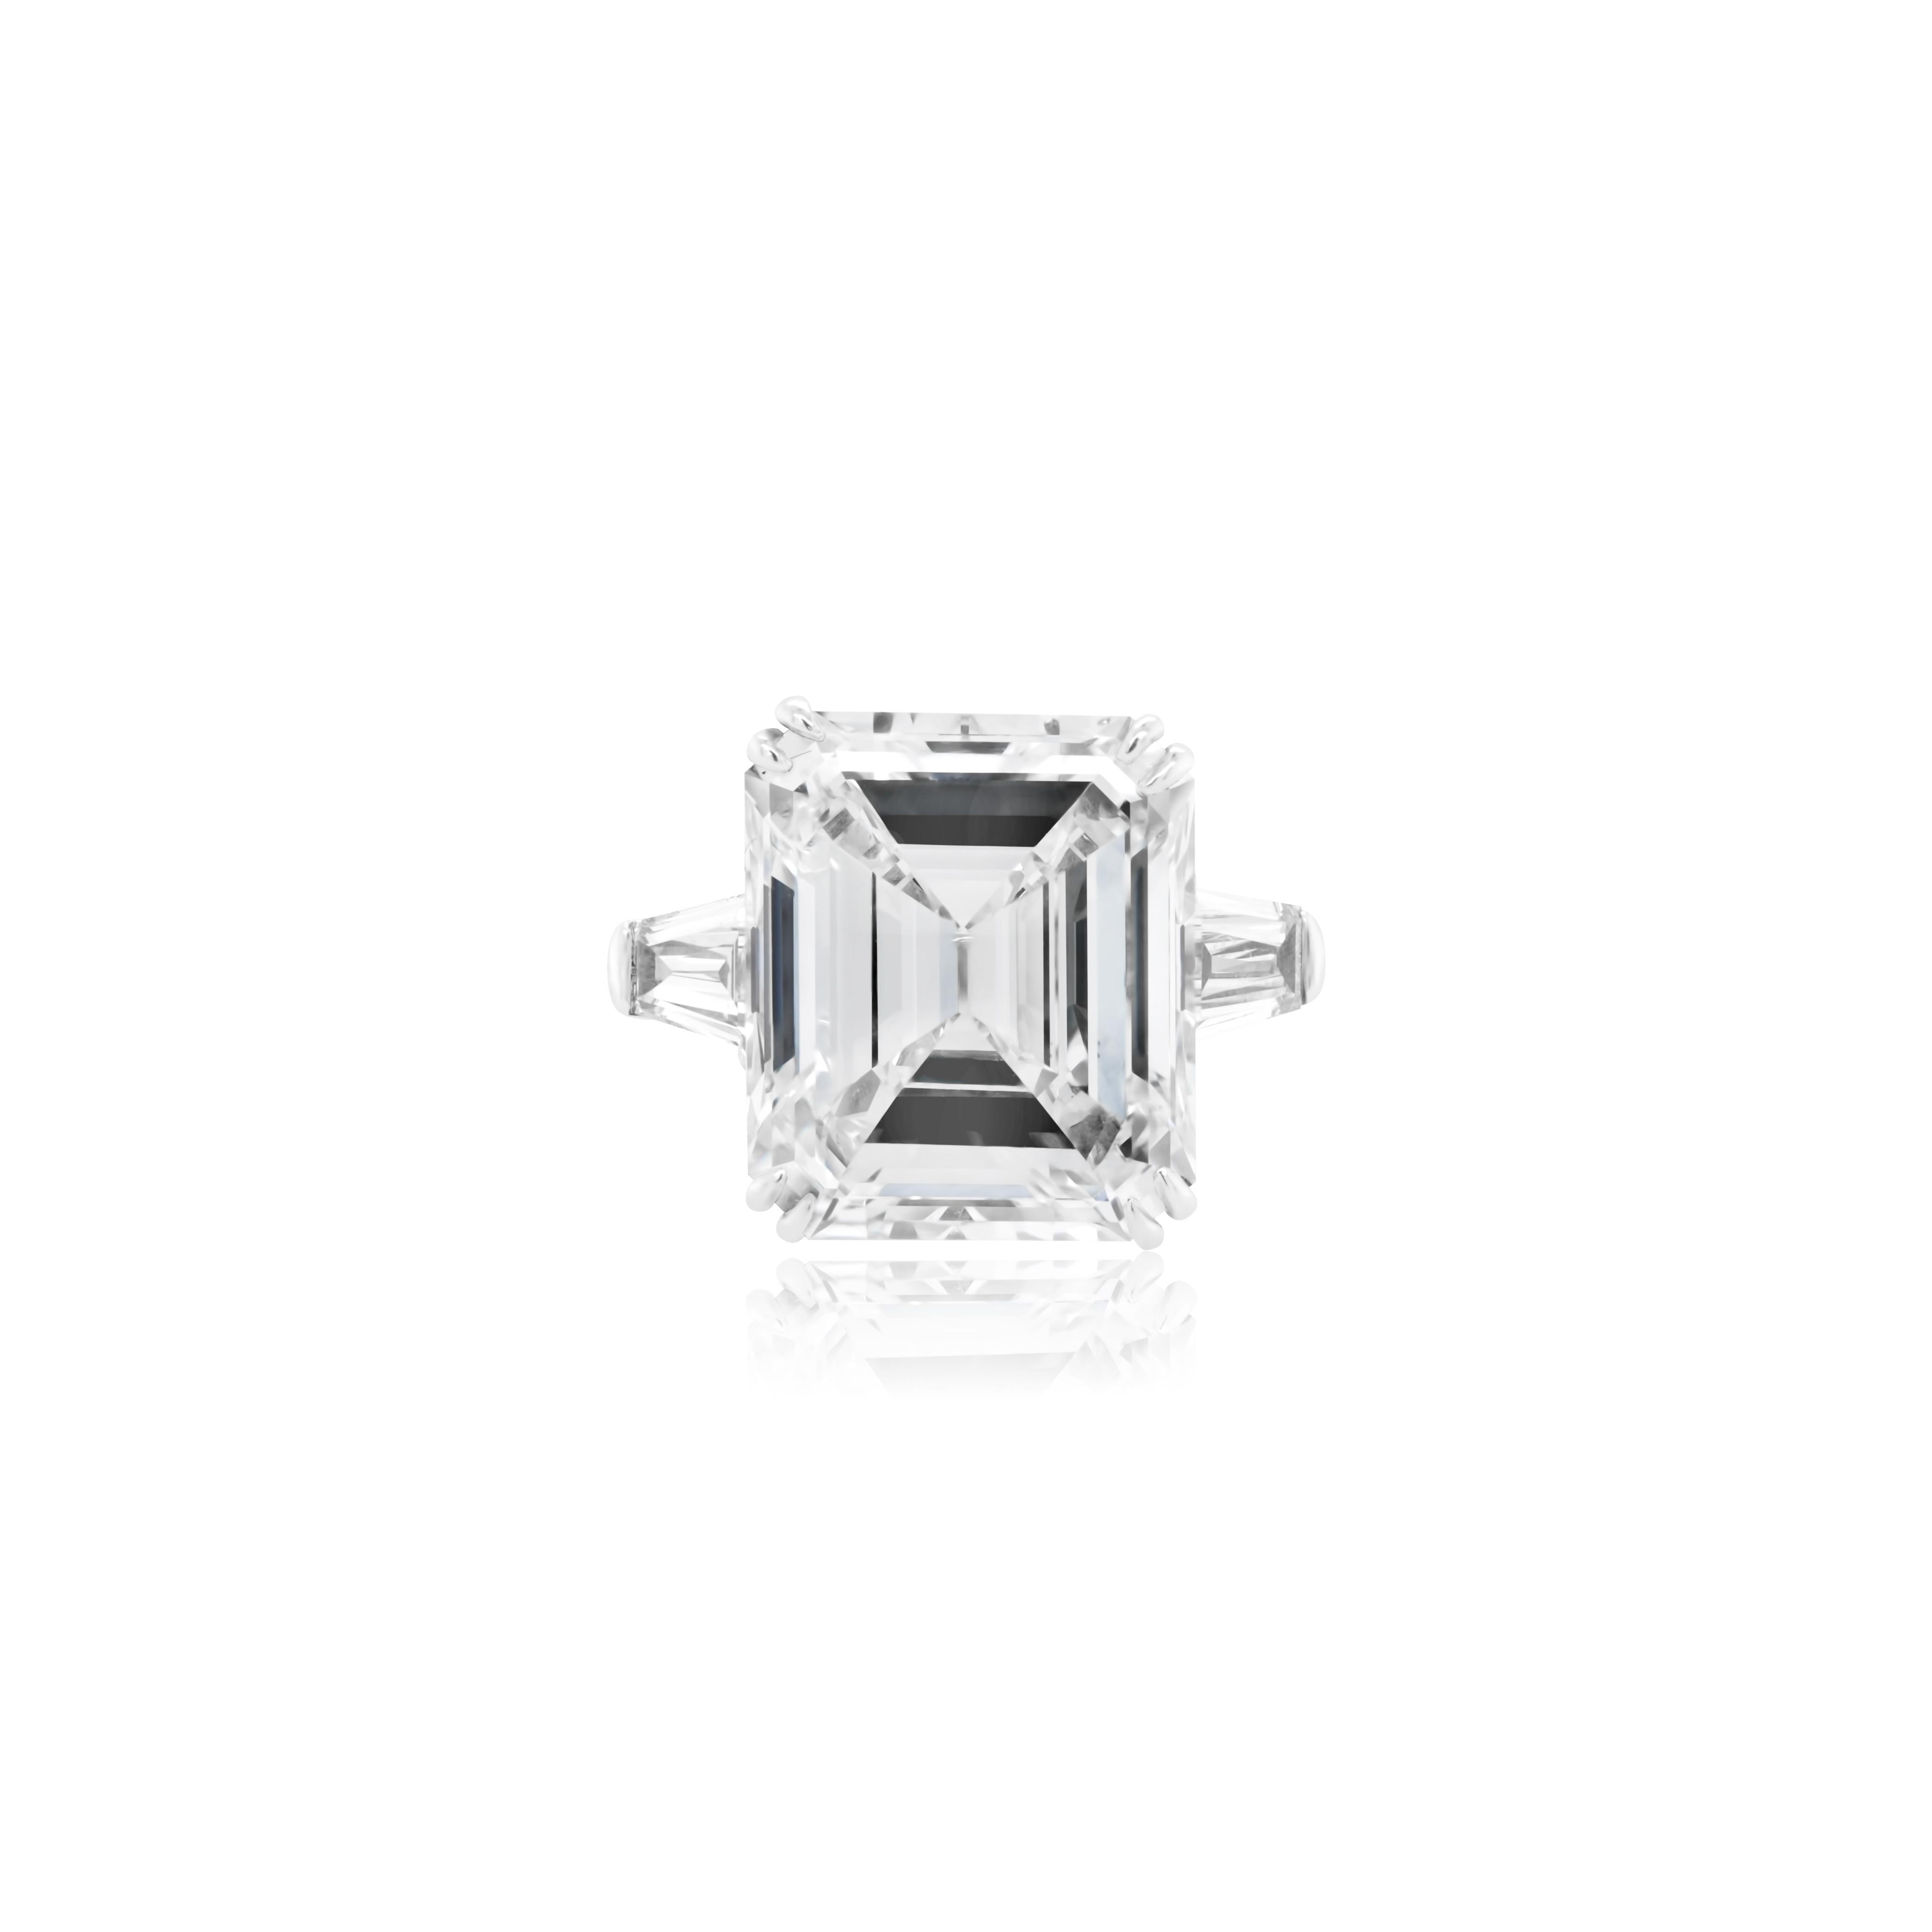 Platinum custom emerald cut diamond ring. 10.03ct diamond color J  clarity SI1  GIA certified set with .60cts tapered baguettes 100% eye clean size 6.5 